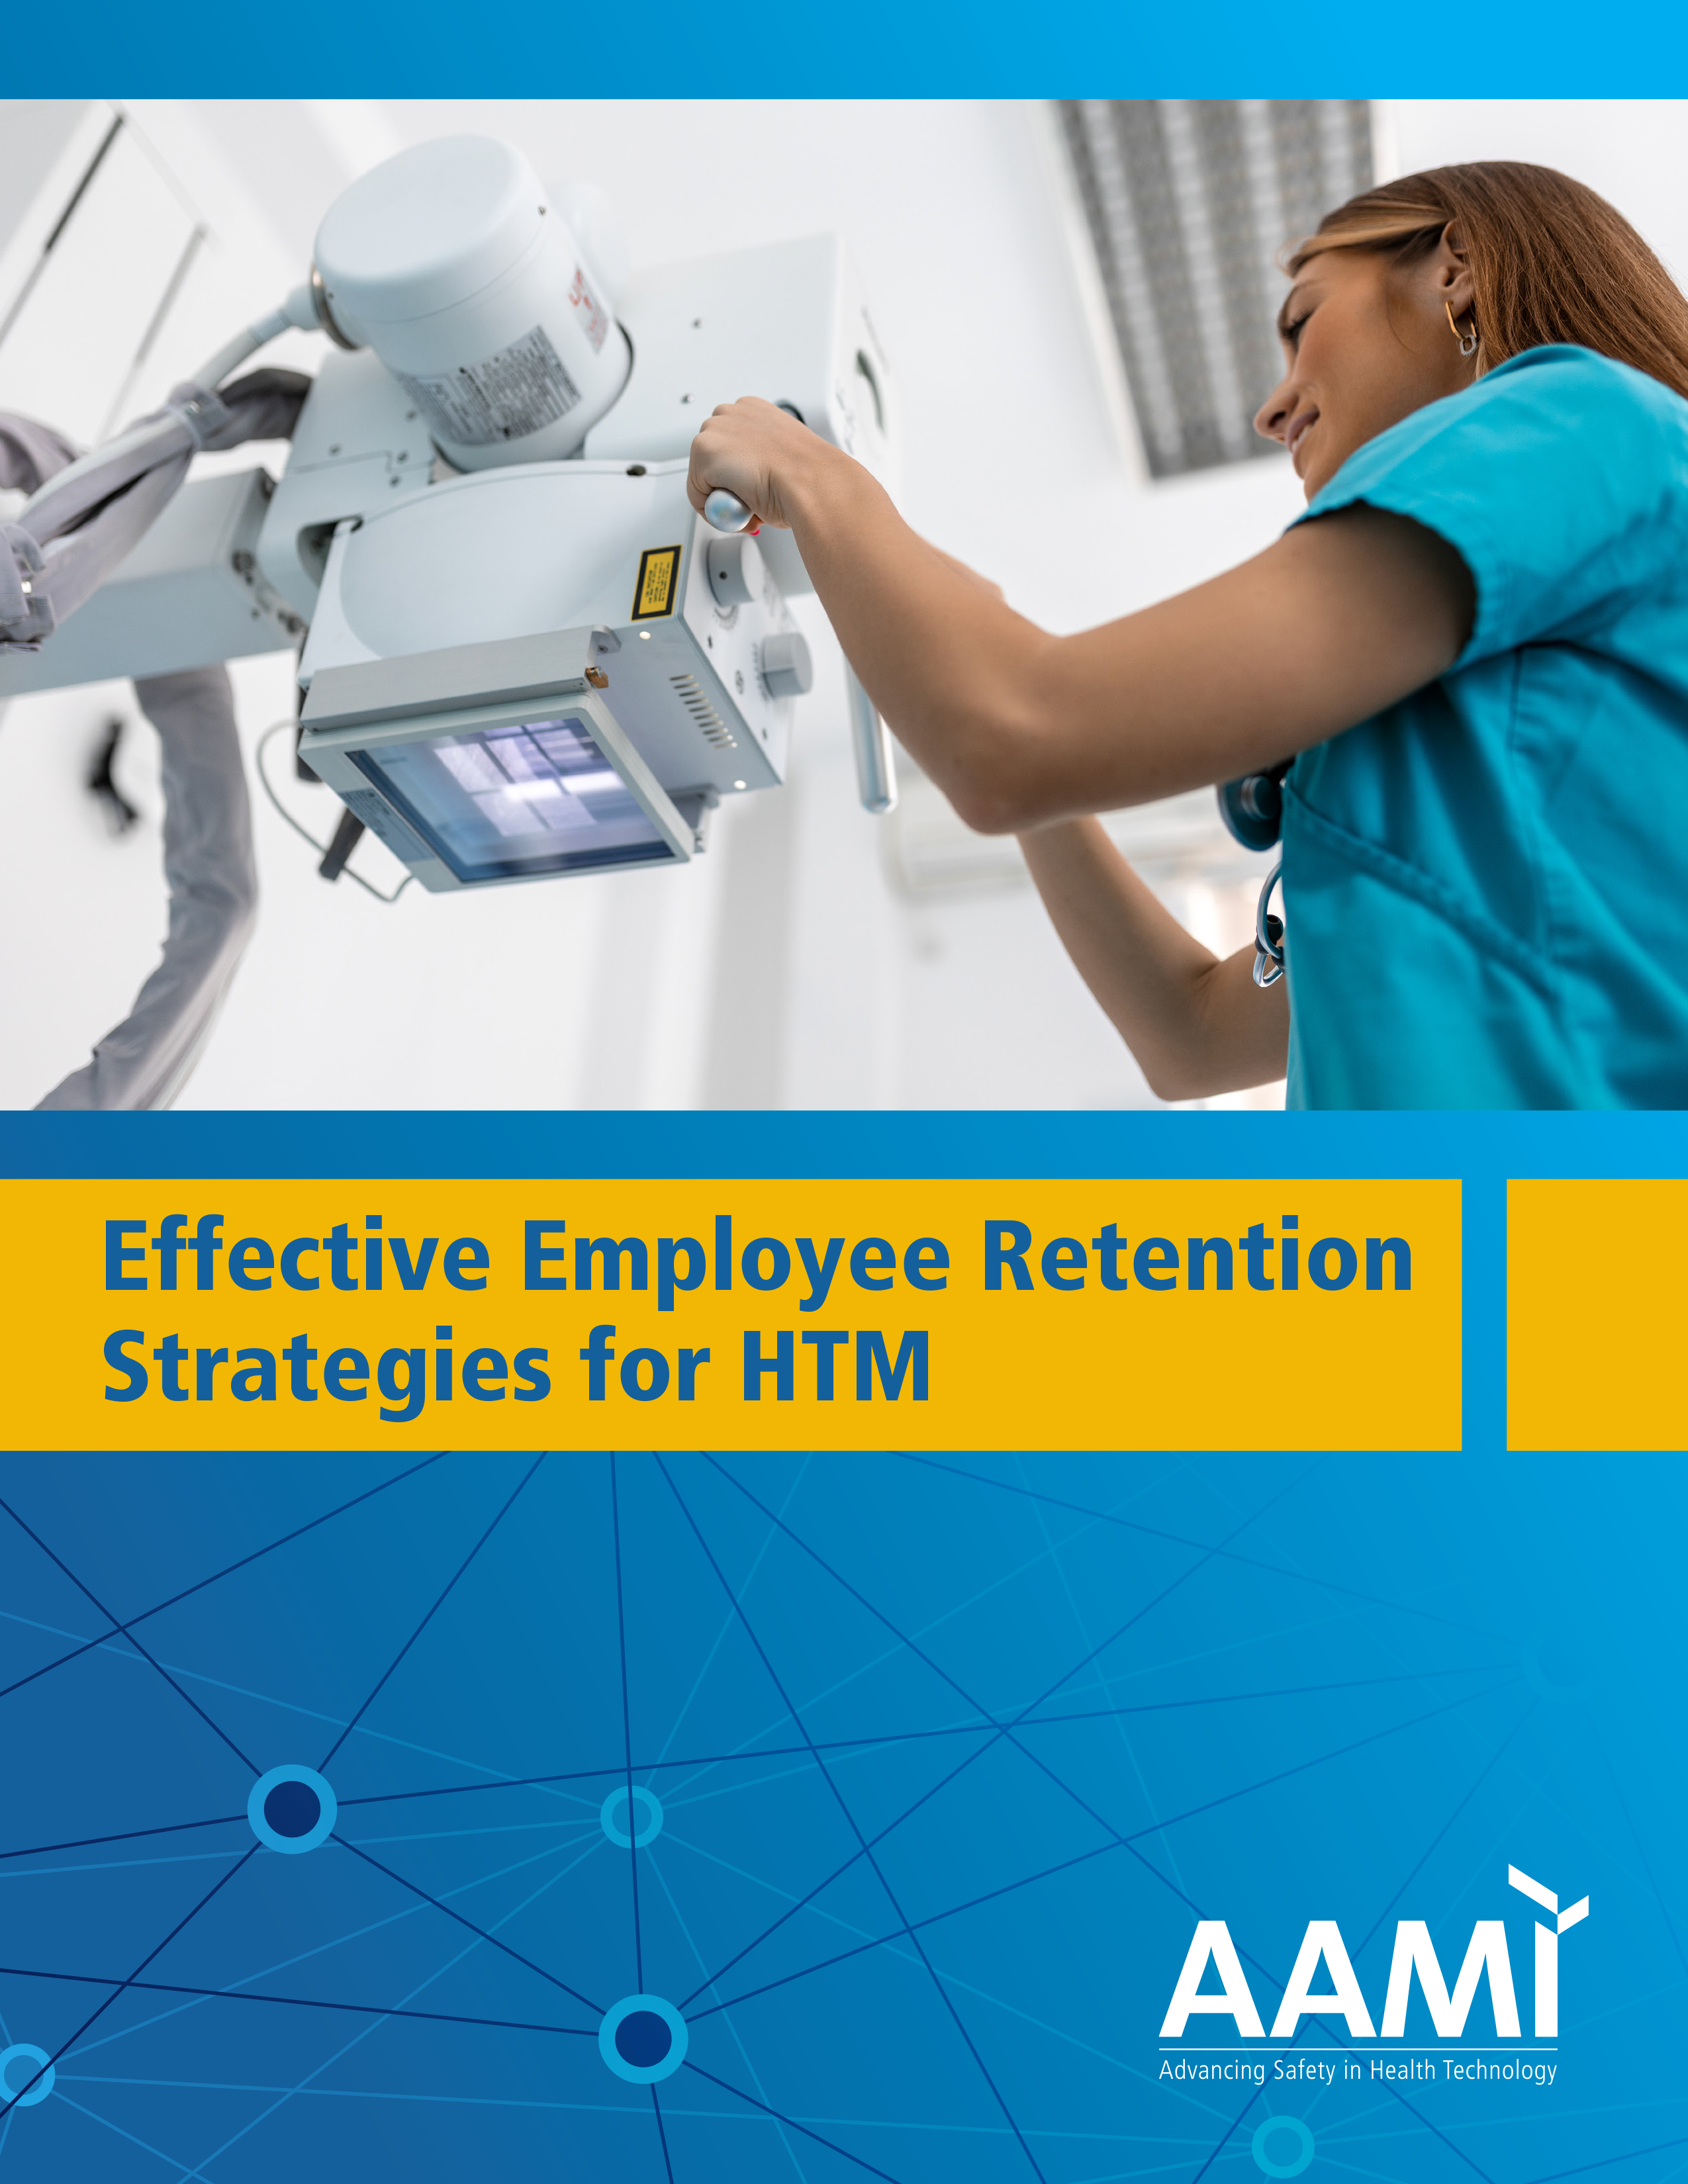 Effective Employee Retention Strategies for HTM